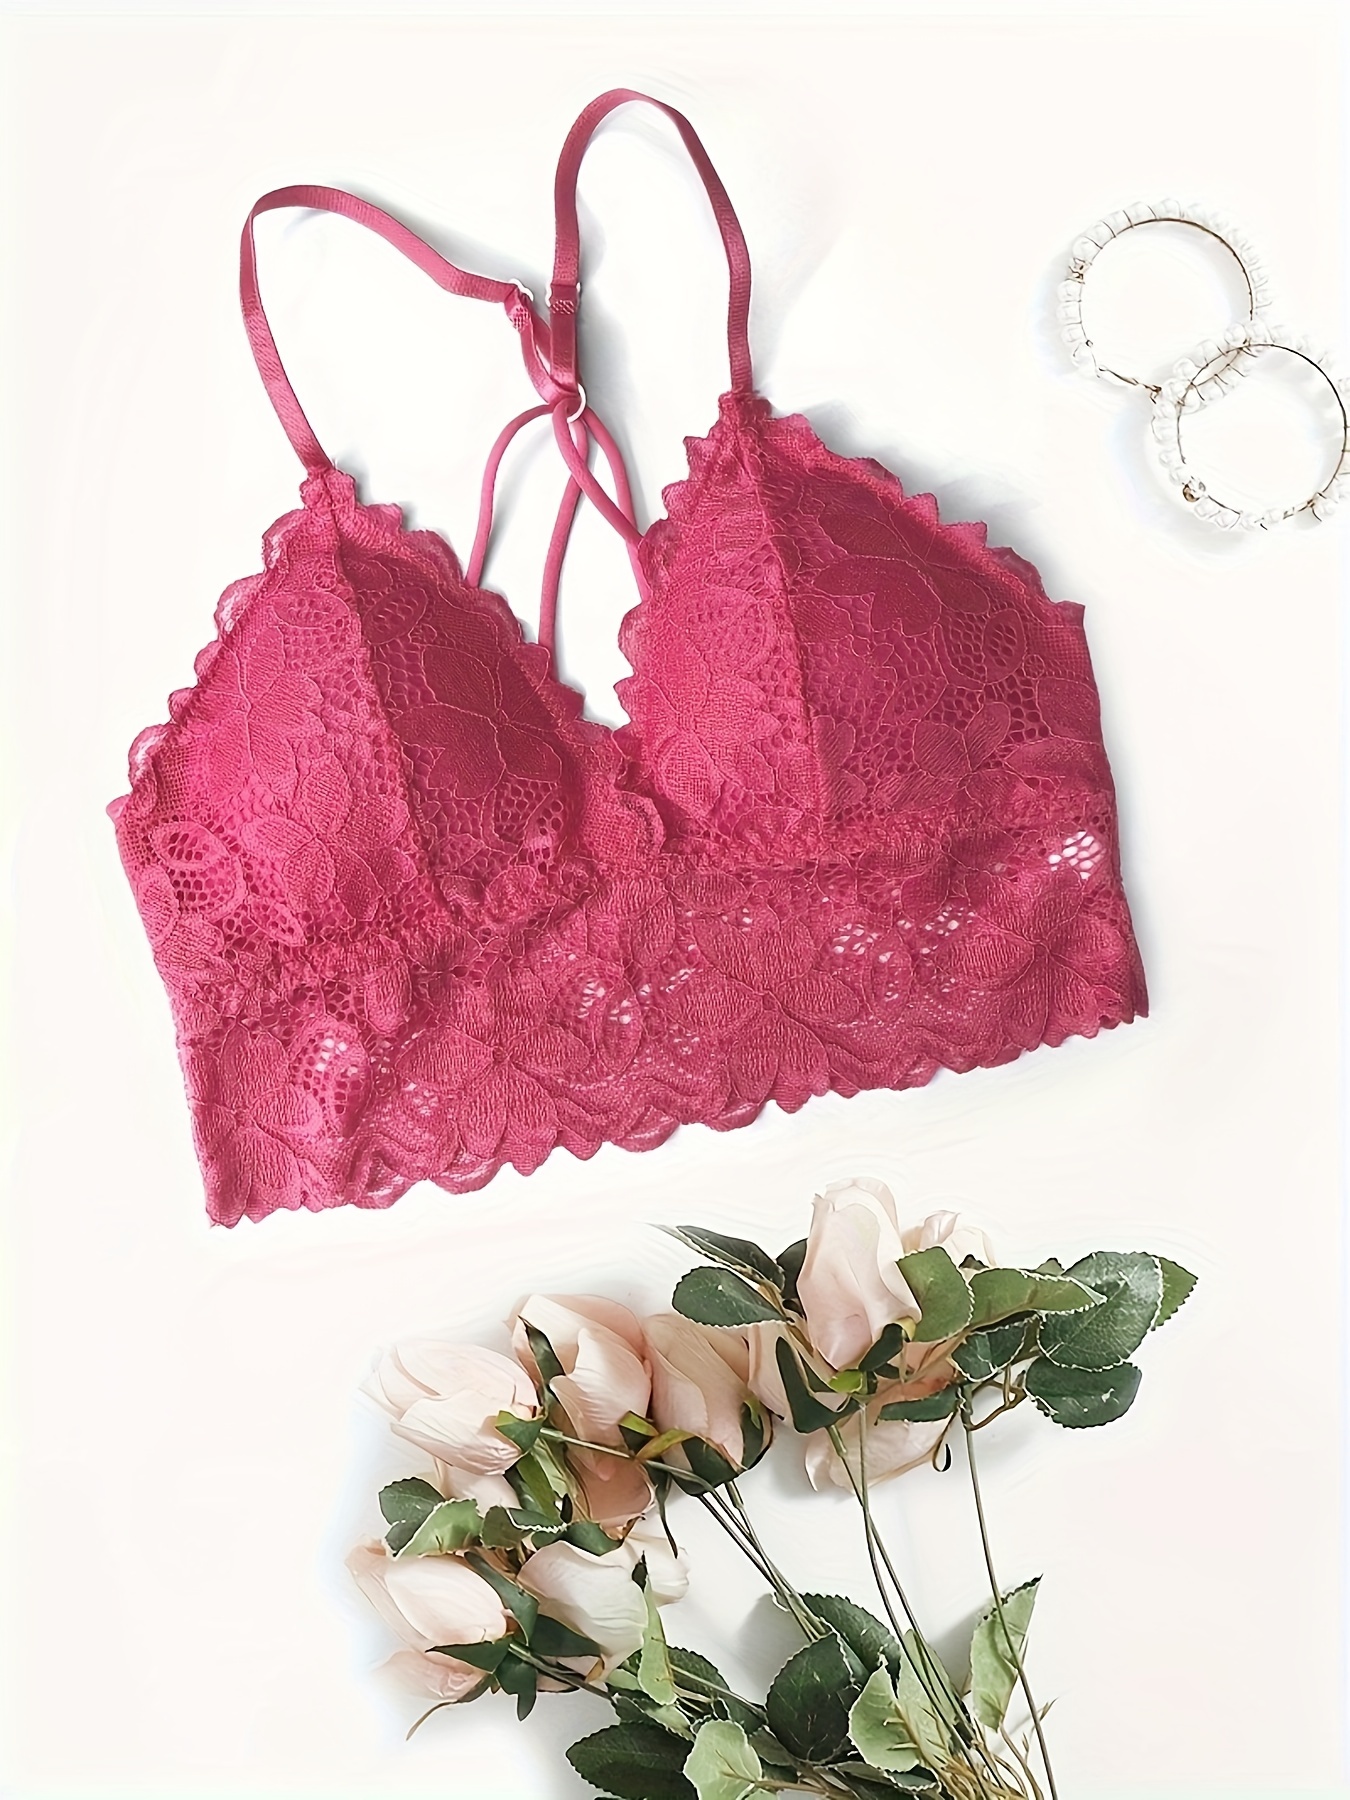 Rosa Scalloped French Lace Bralette –